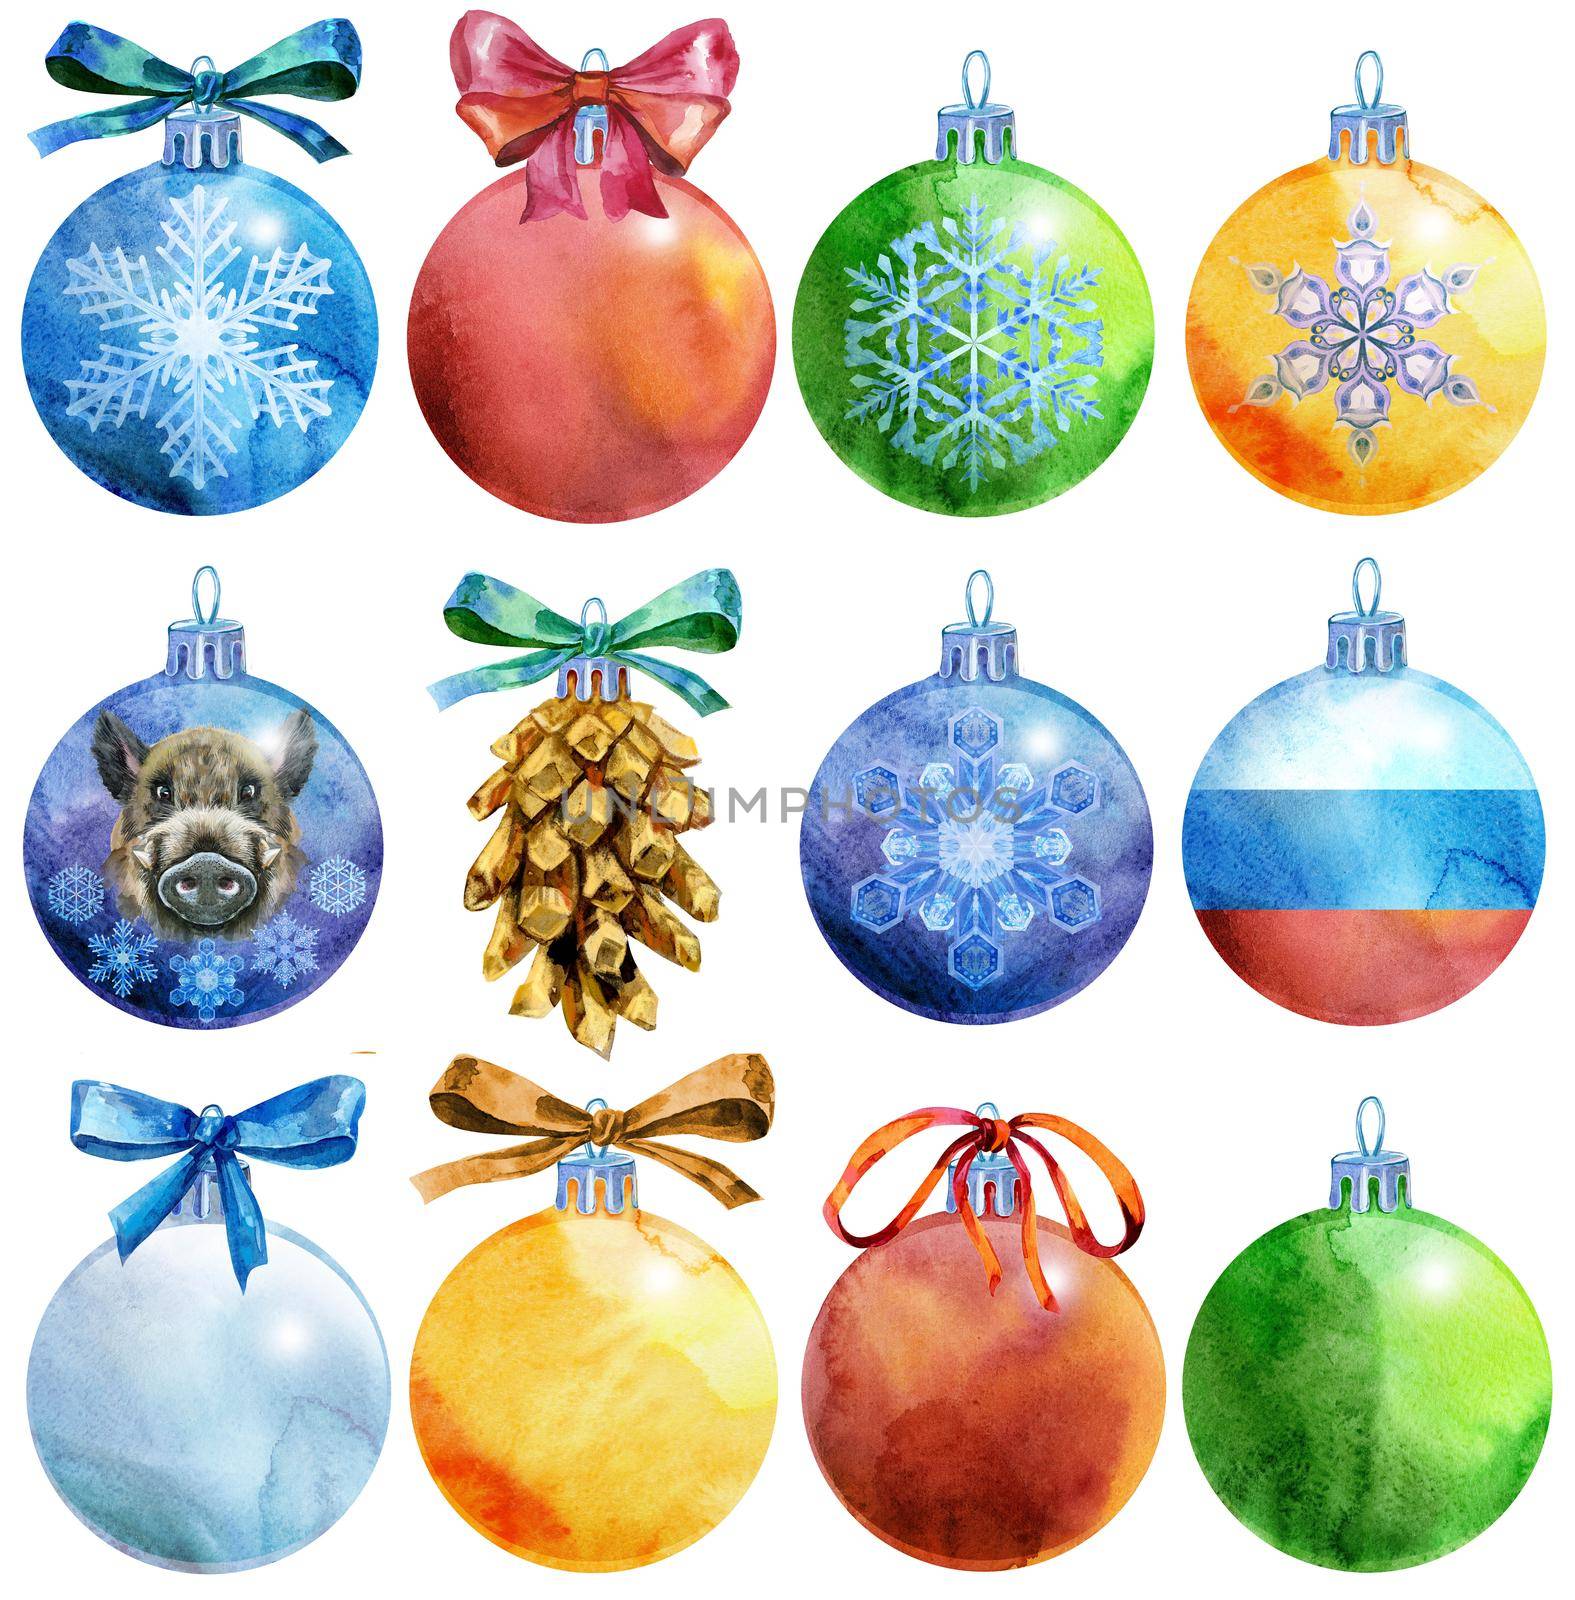 Watercolor Christmas tree balls or your creativity by NataOmsk